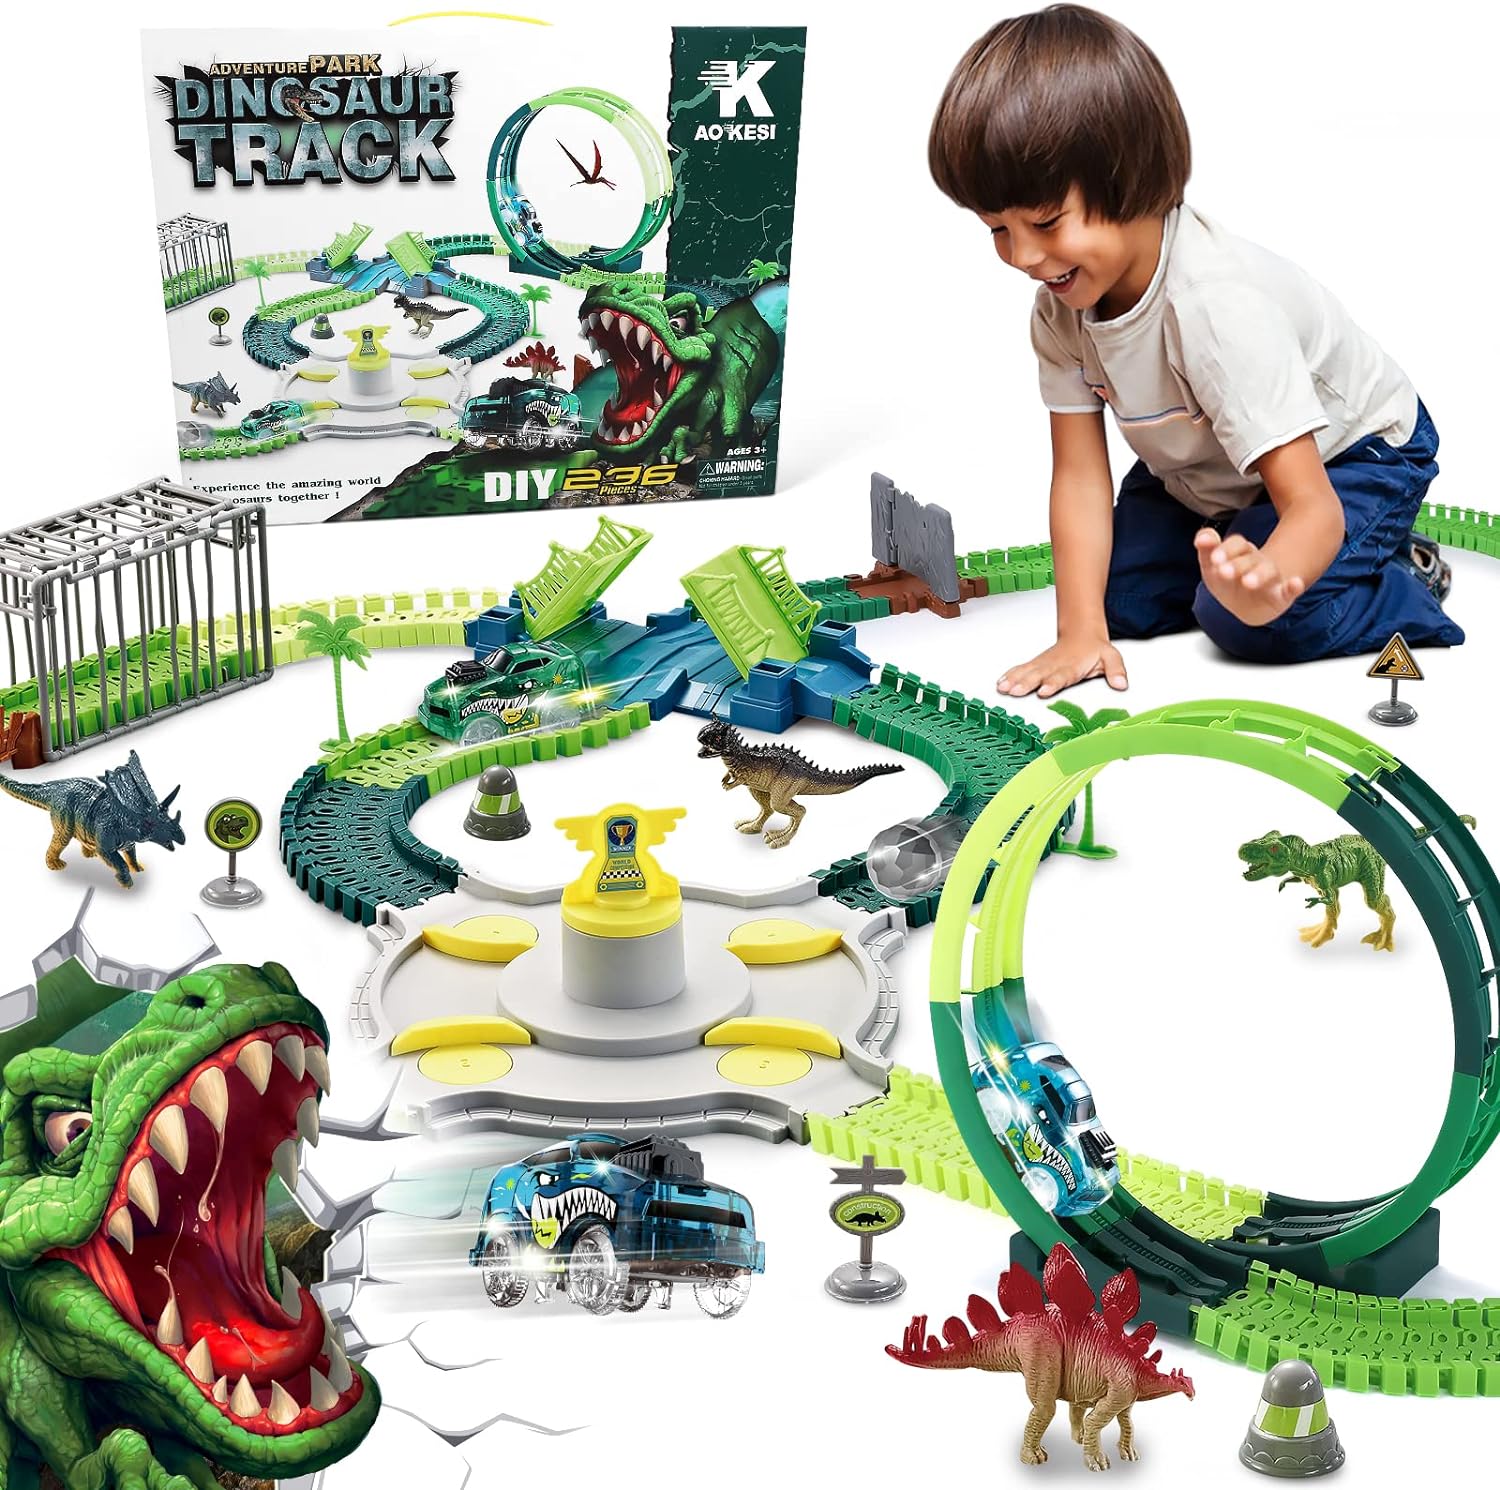 Dinosaurs are so intriguing to my three-year old grandson. In fact, he is going to be one for Halloween. This Dinosaur Train Track Set is perfect for his Jurassic Park play experience. Love that the track pieces can be flexed and configured to form different terrains using the slopes and hanging bridge pieces. What a joy it is to actually find toys such as this which encourage the use of his creative abilities. I can say that this play set does just that!